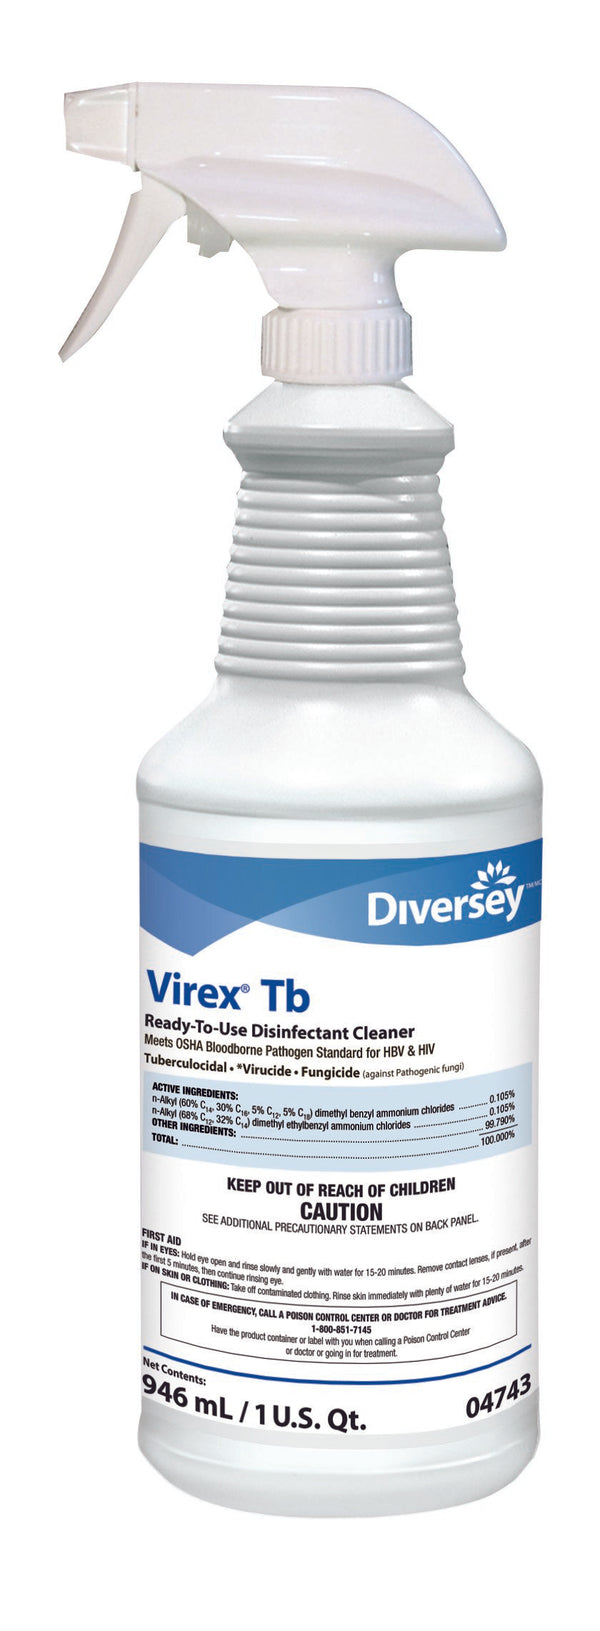 Virex Tb Surface Disinfectant Cleaner, 32oz -Case of 12